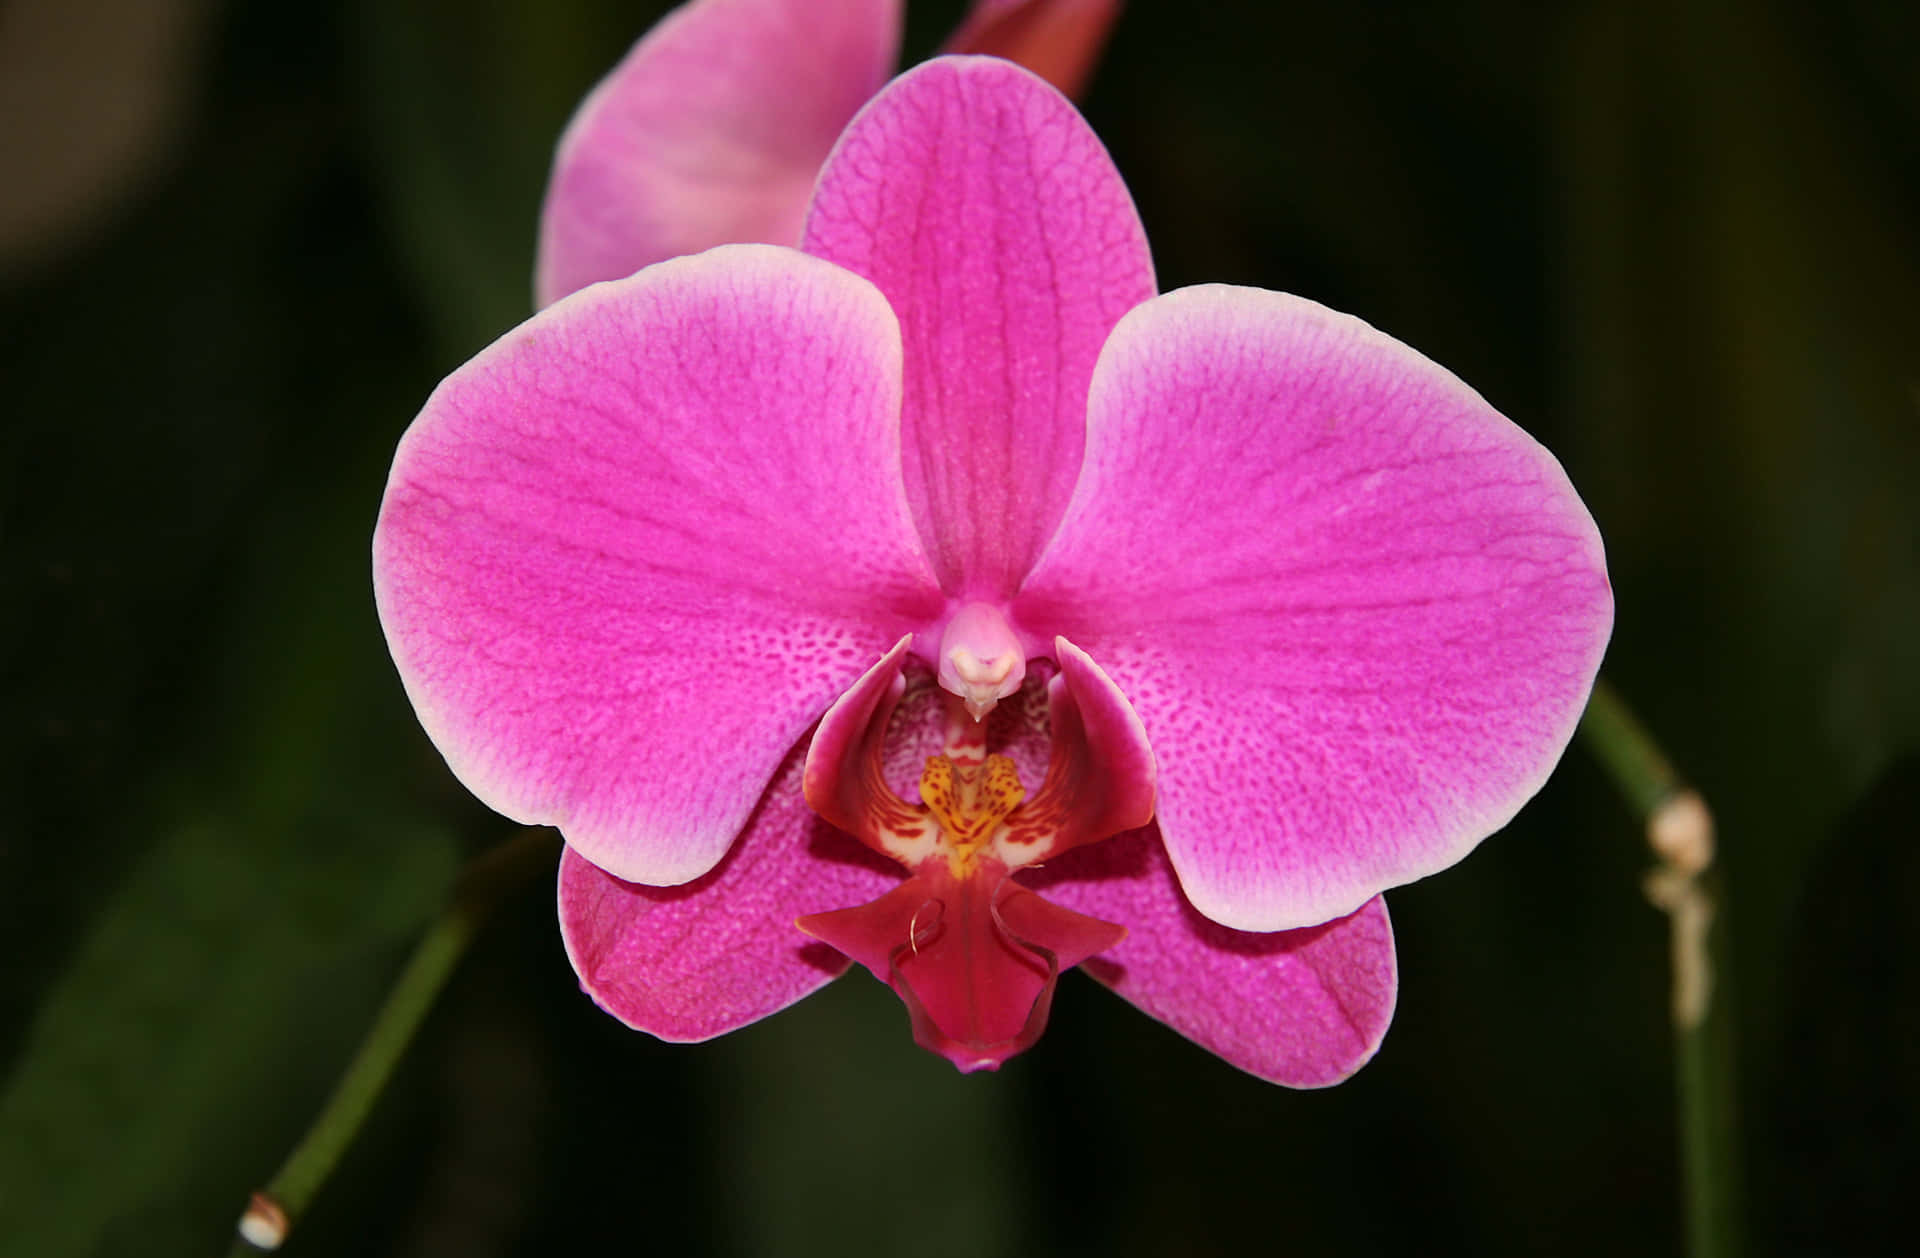 The beautiful and captivating beauty of Orchid Flowers